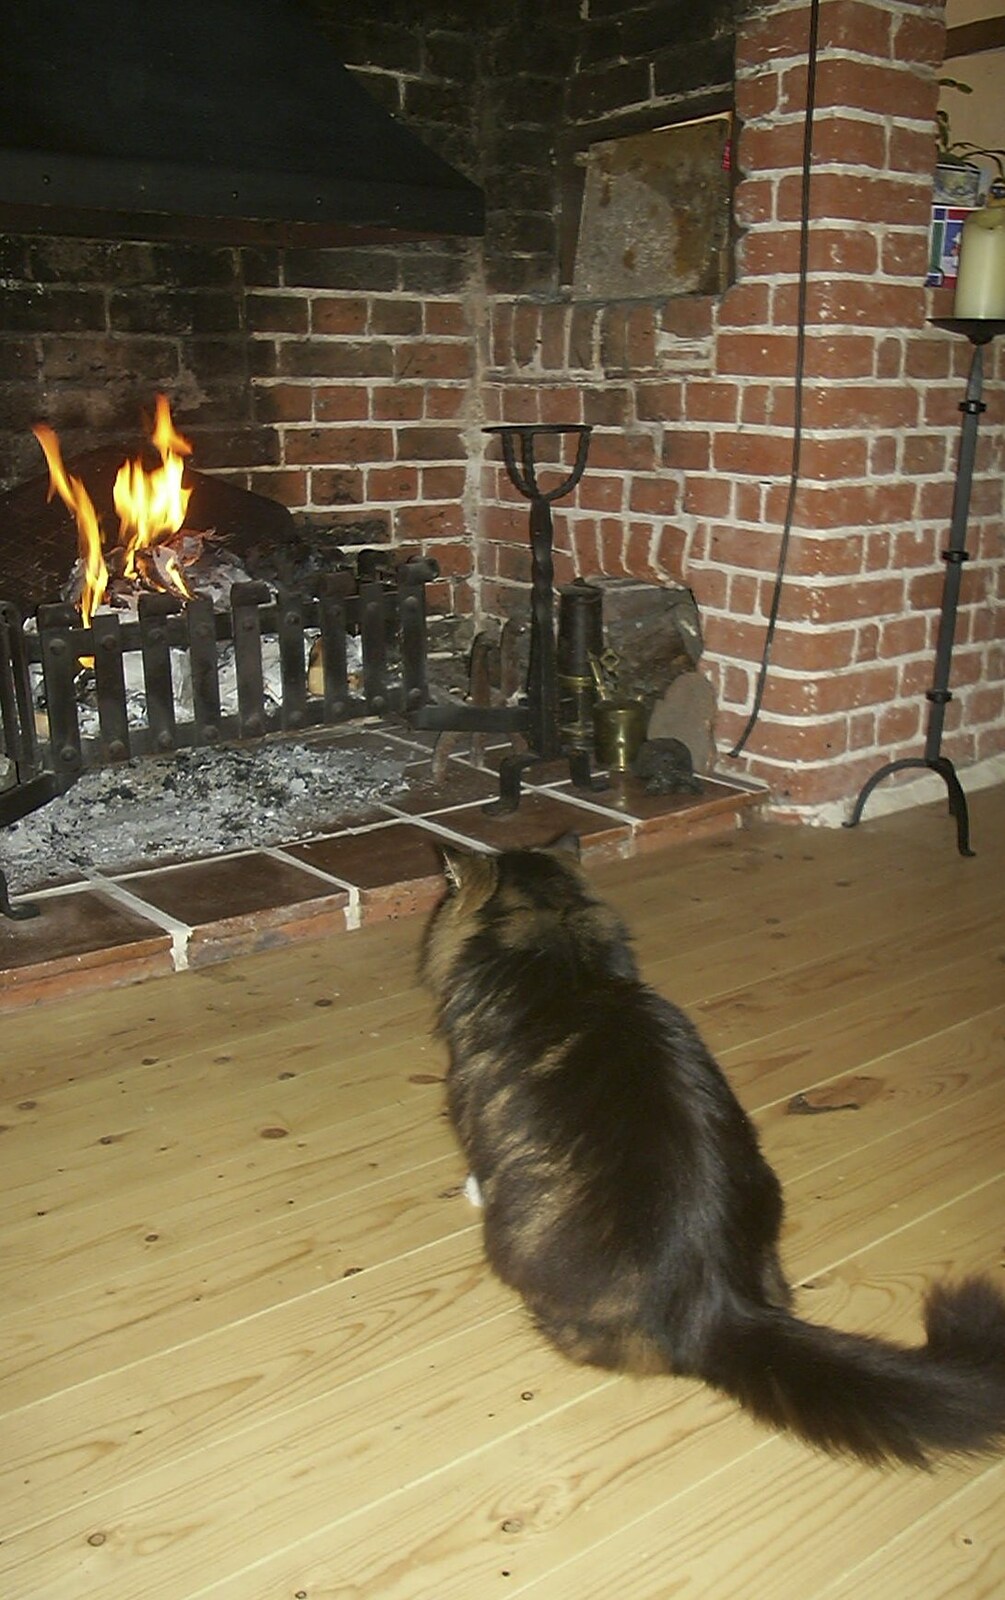 Soph-bags sits in front of the fire from Nearly Christmas With Sis and Matt, Brome, Suffolk - 24th December 2001